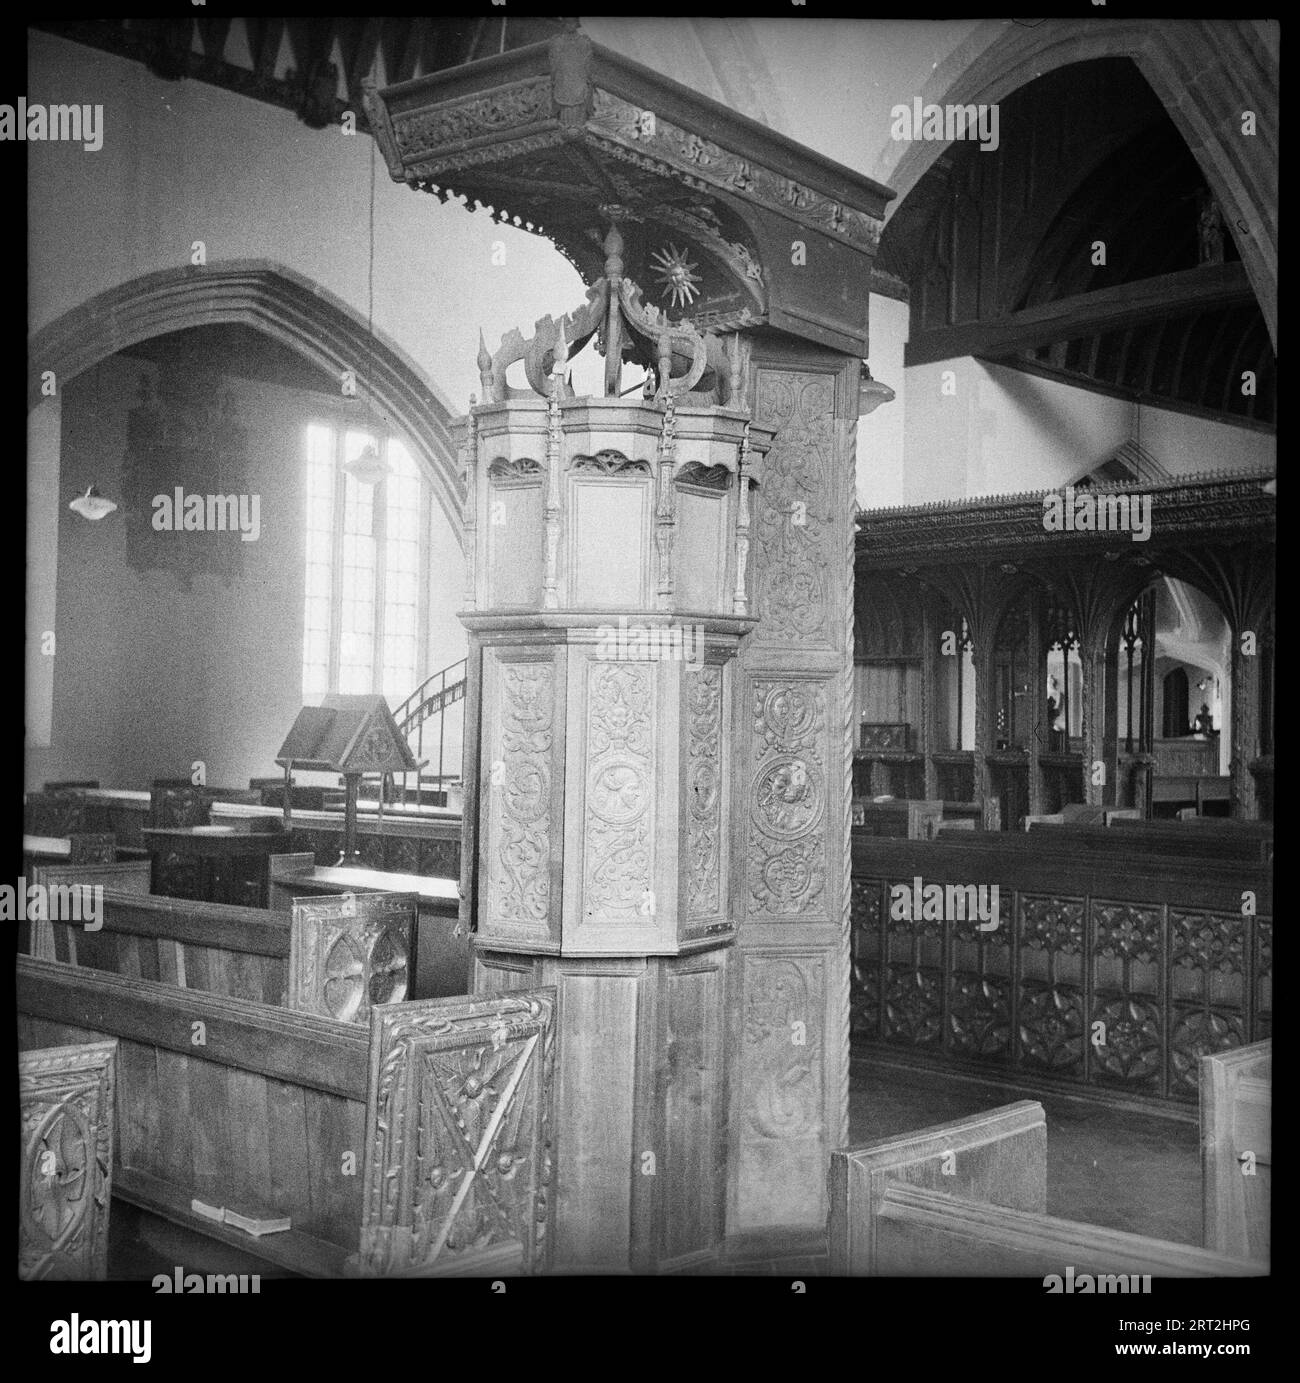 St James' Church, Swimbridge, North Devon, Devon, 1940-1962. Detail of a lead-lined Renaissance font with wooden casing that resembles a pulpit. The font has three tiers, each of which are panelled. The lower tier has plain panels, while the middle tier has decorated panels, of which some hinge open to reveal to top of the font, however in the image they are closed. The top panels are also plain, but are topped with pinnacles. Above this is an open crown over and a large rectangular canopy. In the background is a chancel screen which crosses the church and was restored in 1880. Above this is a Stock Photo